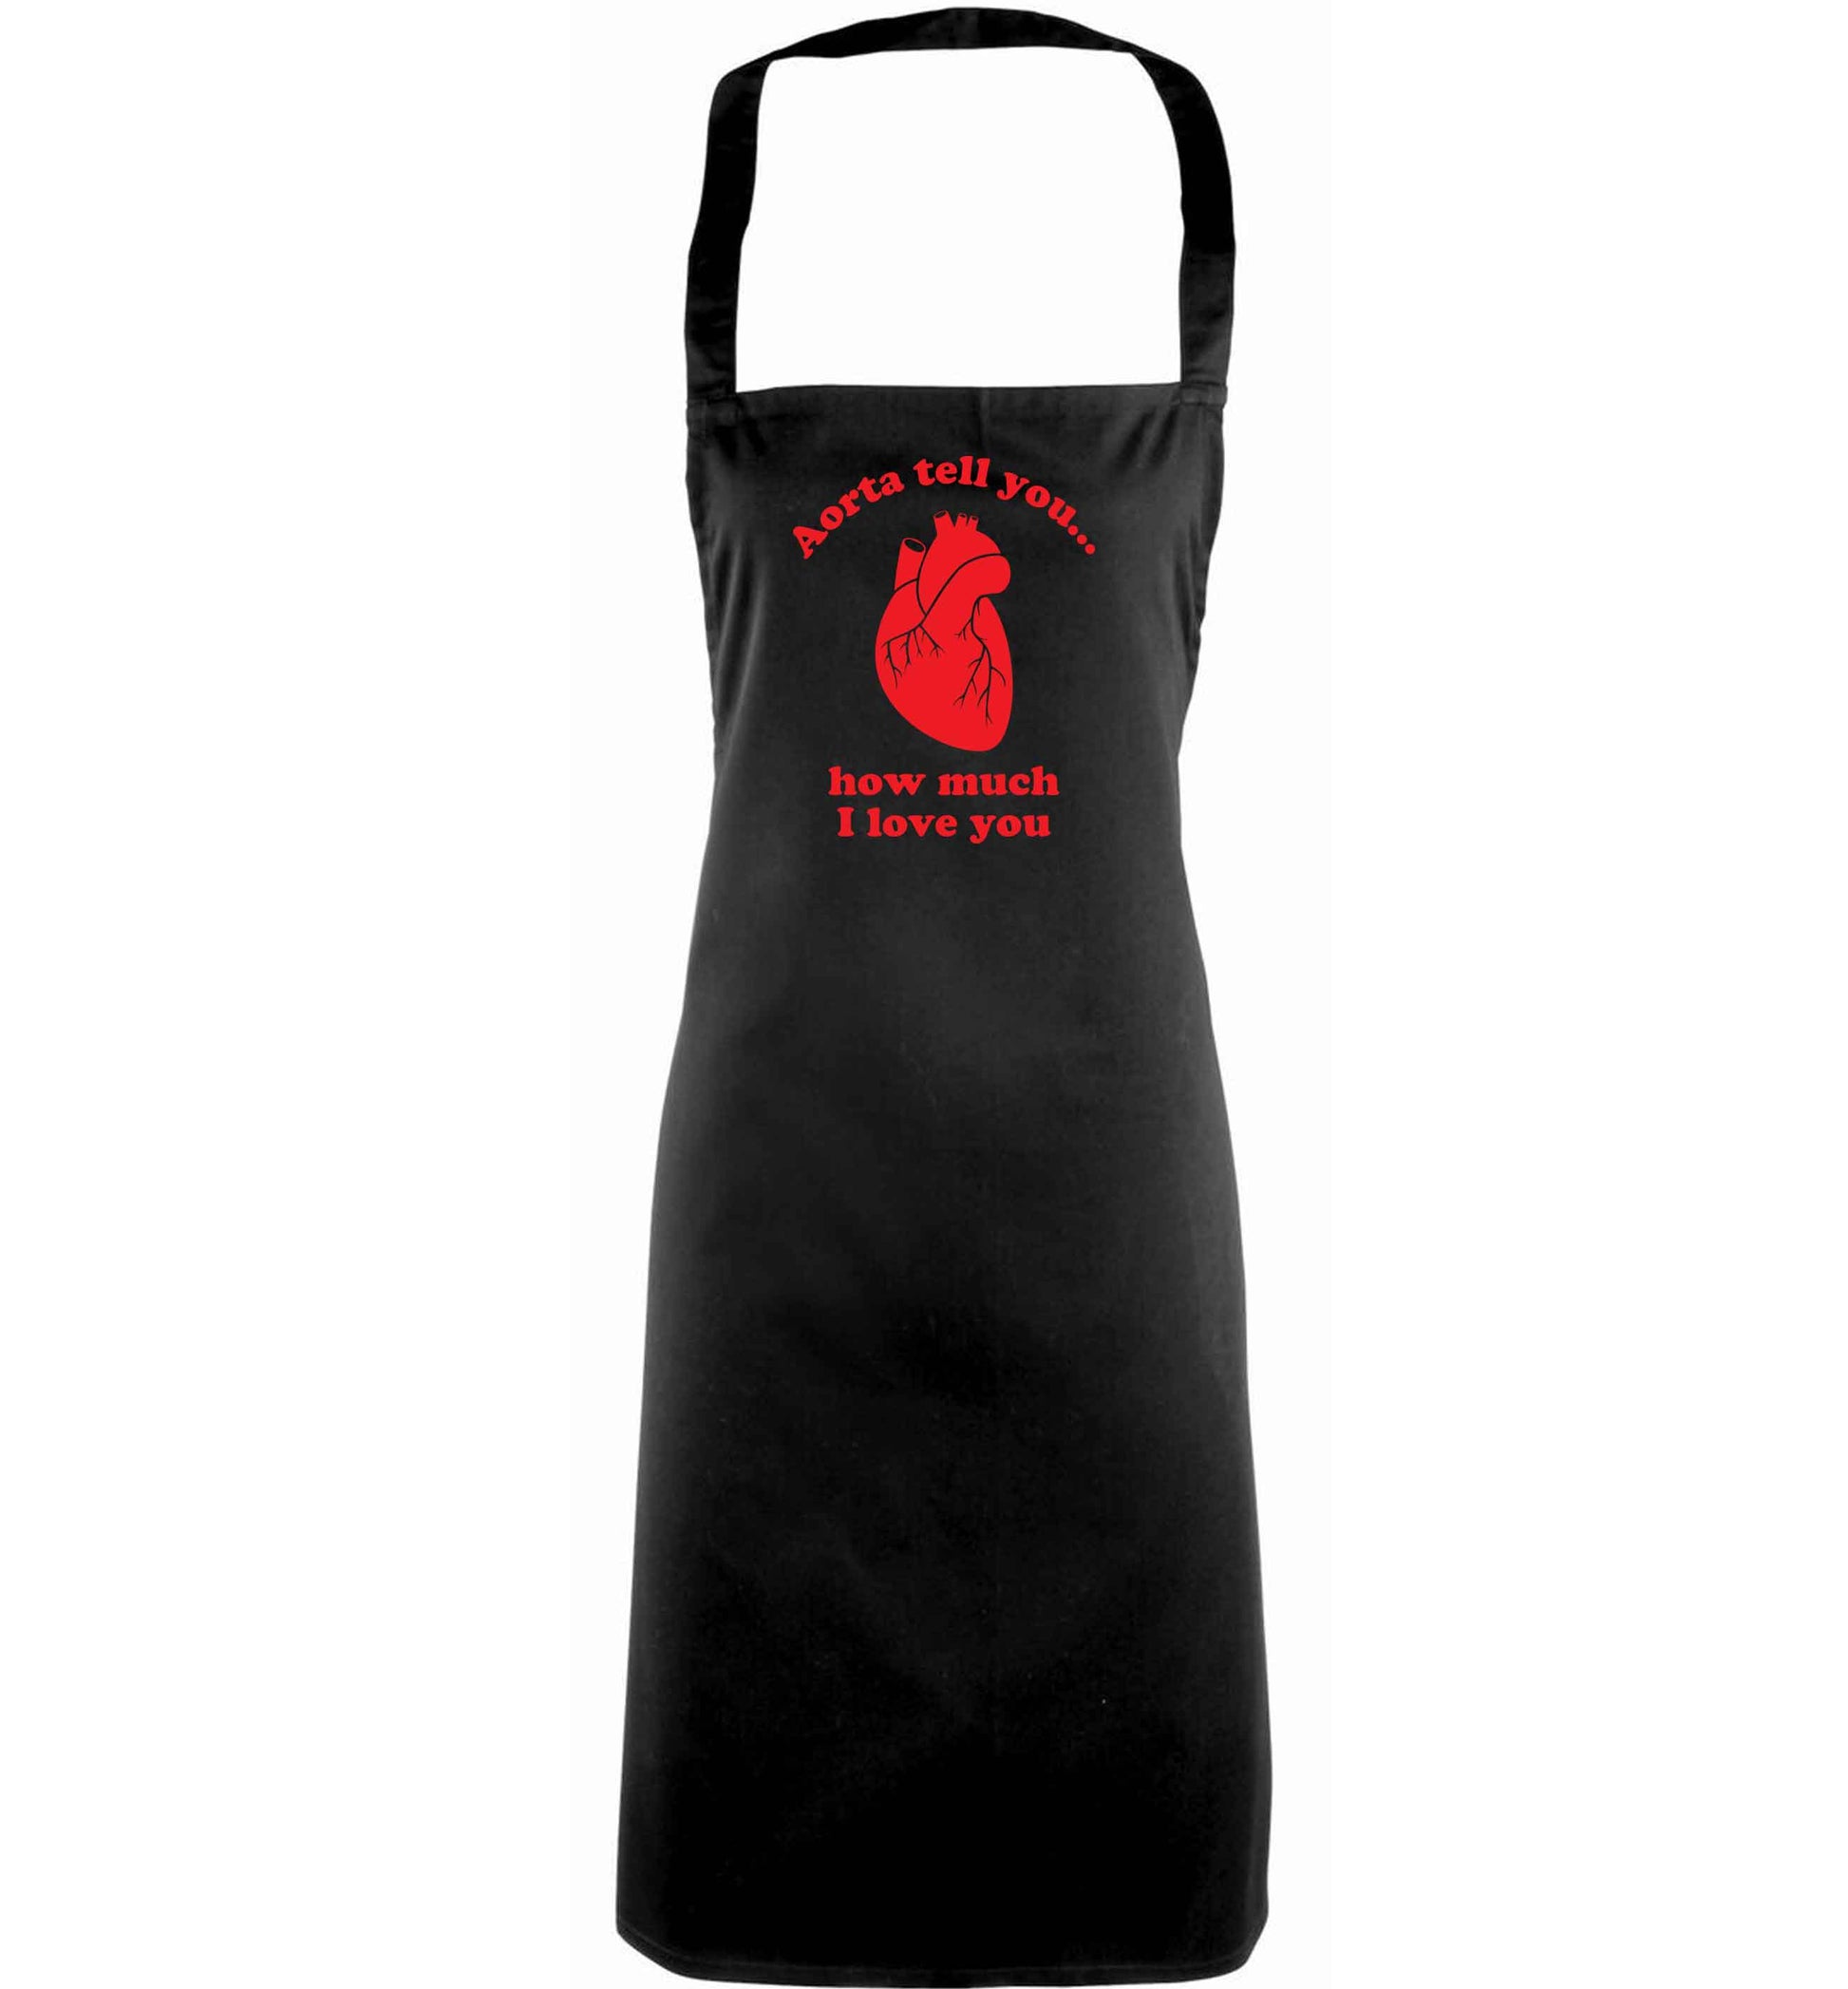 Aorta tell you how much I love you adults black apron